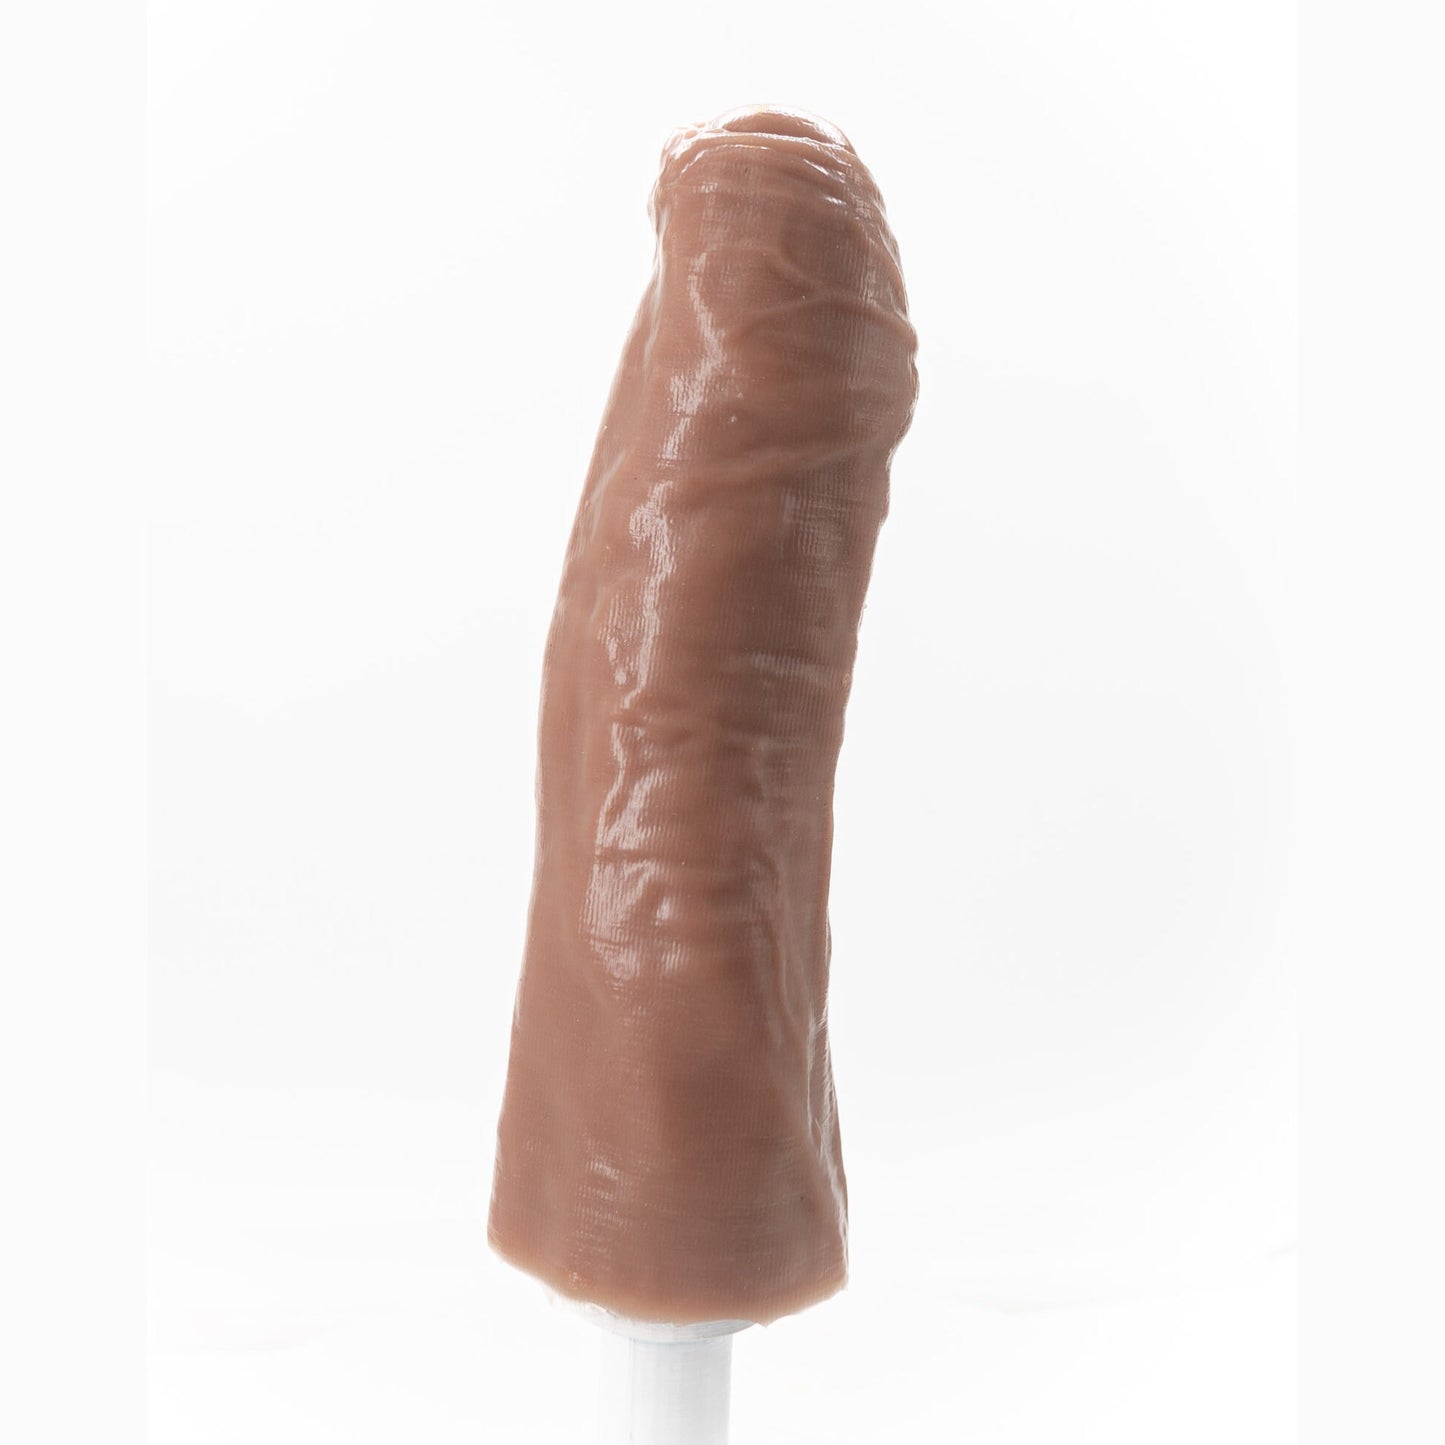 7.5 inch realistic penis sleeve/strap on - modeled after a real guy